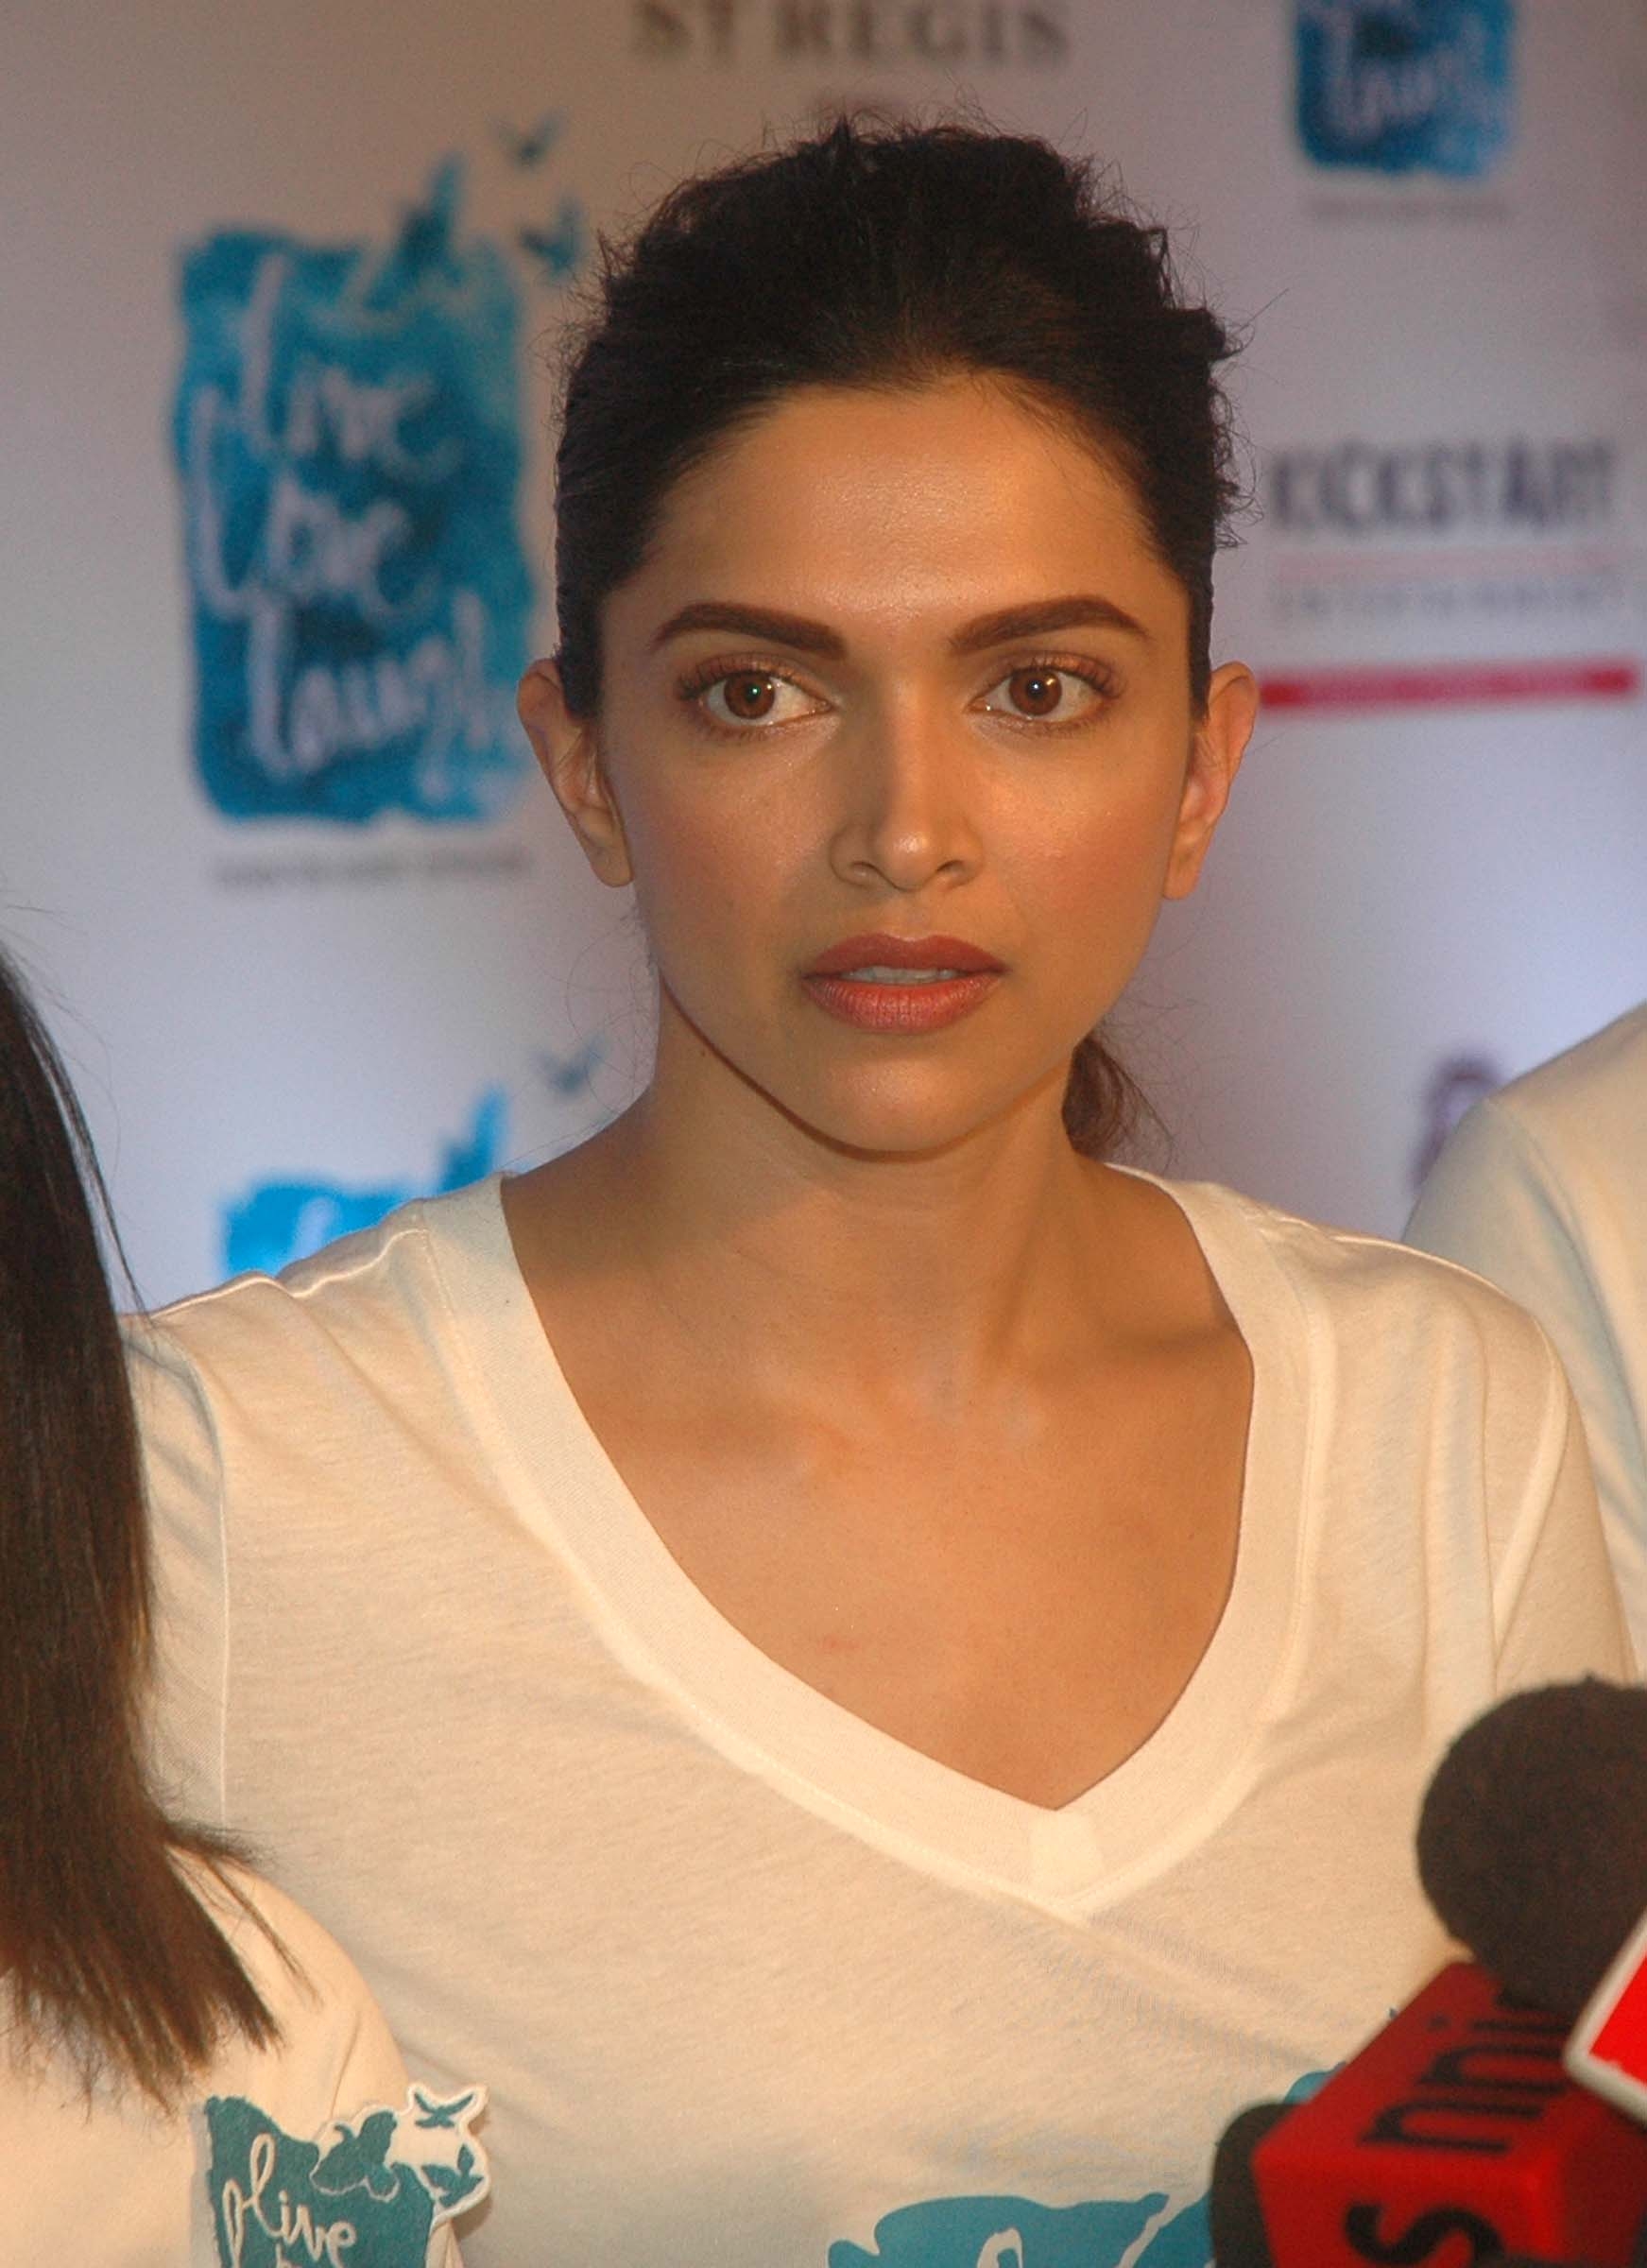 Deepika Padukone during the launch of her NGO The Live Love Laugh Foundation in Mumbai